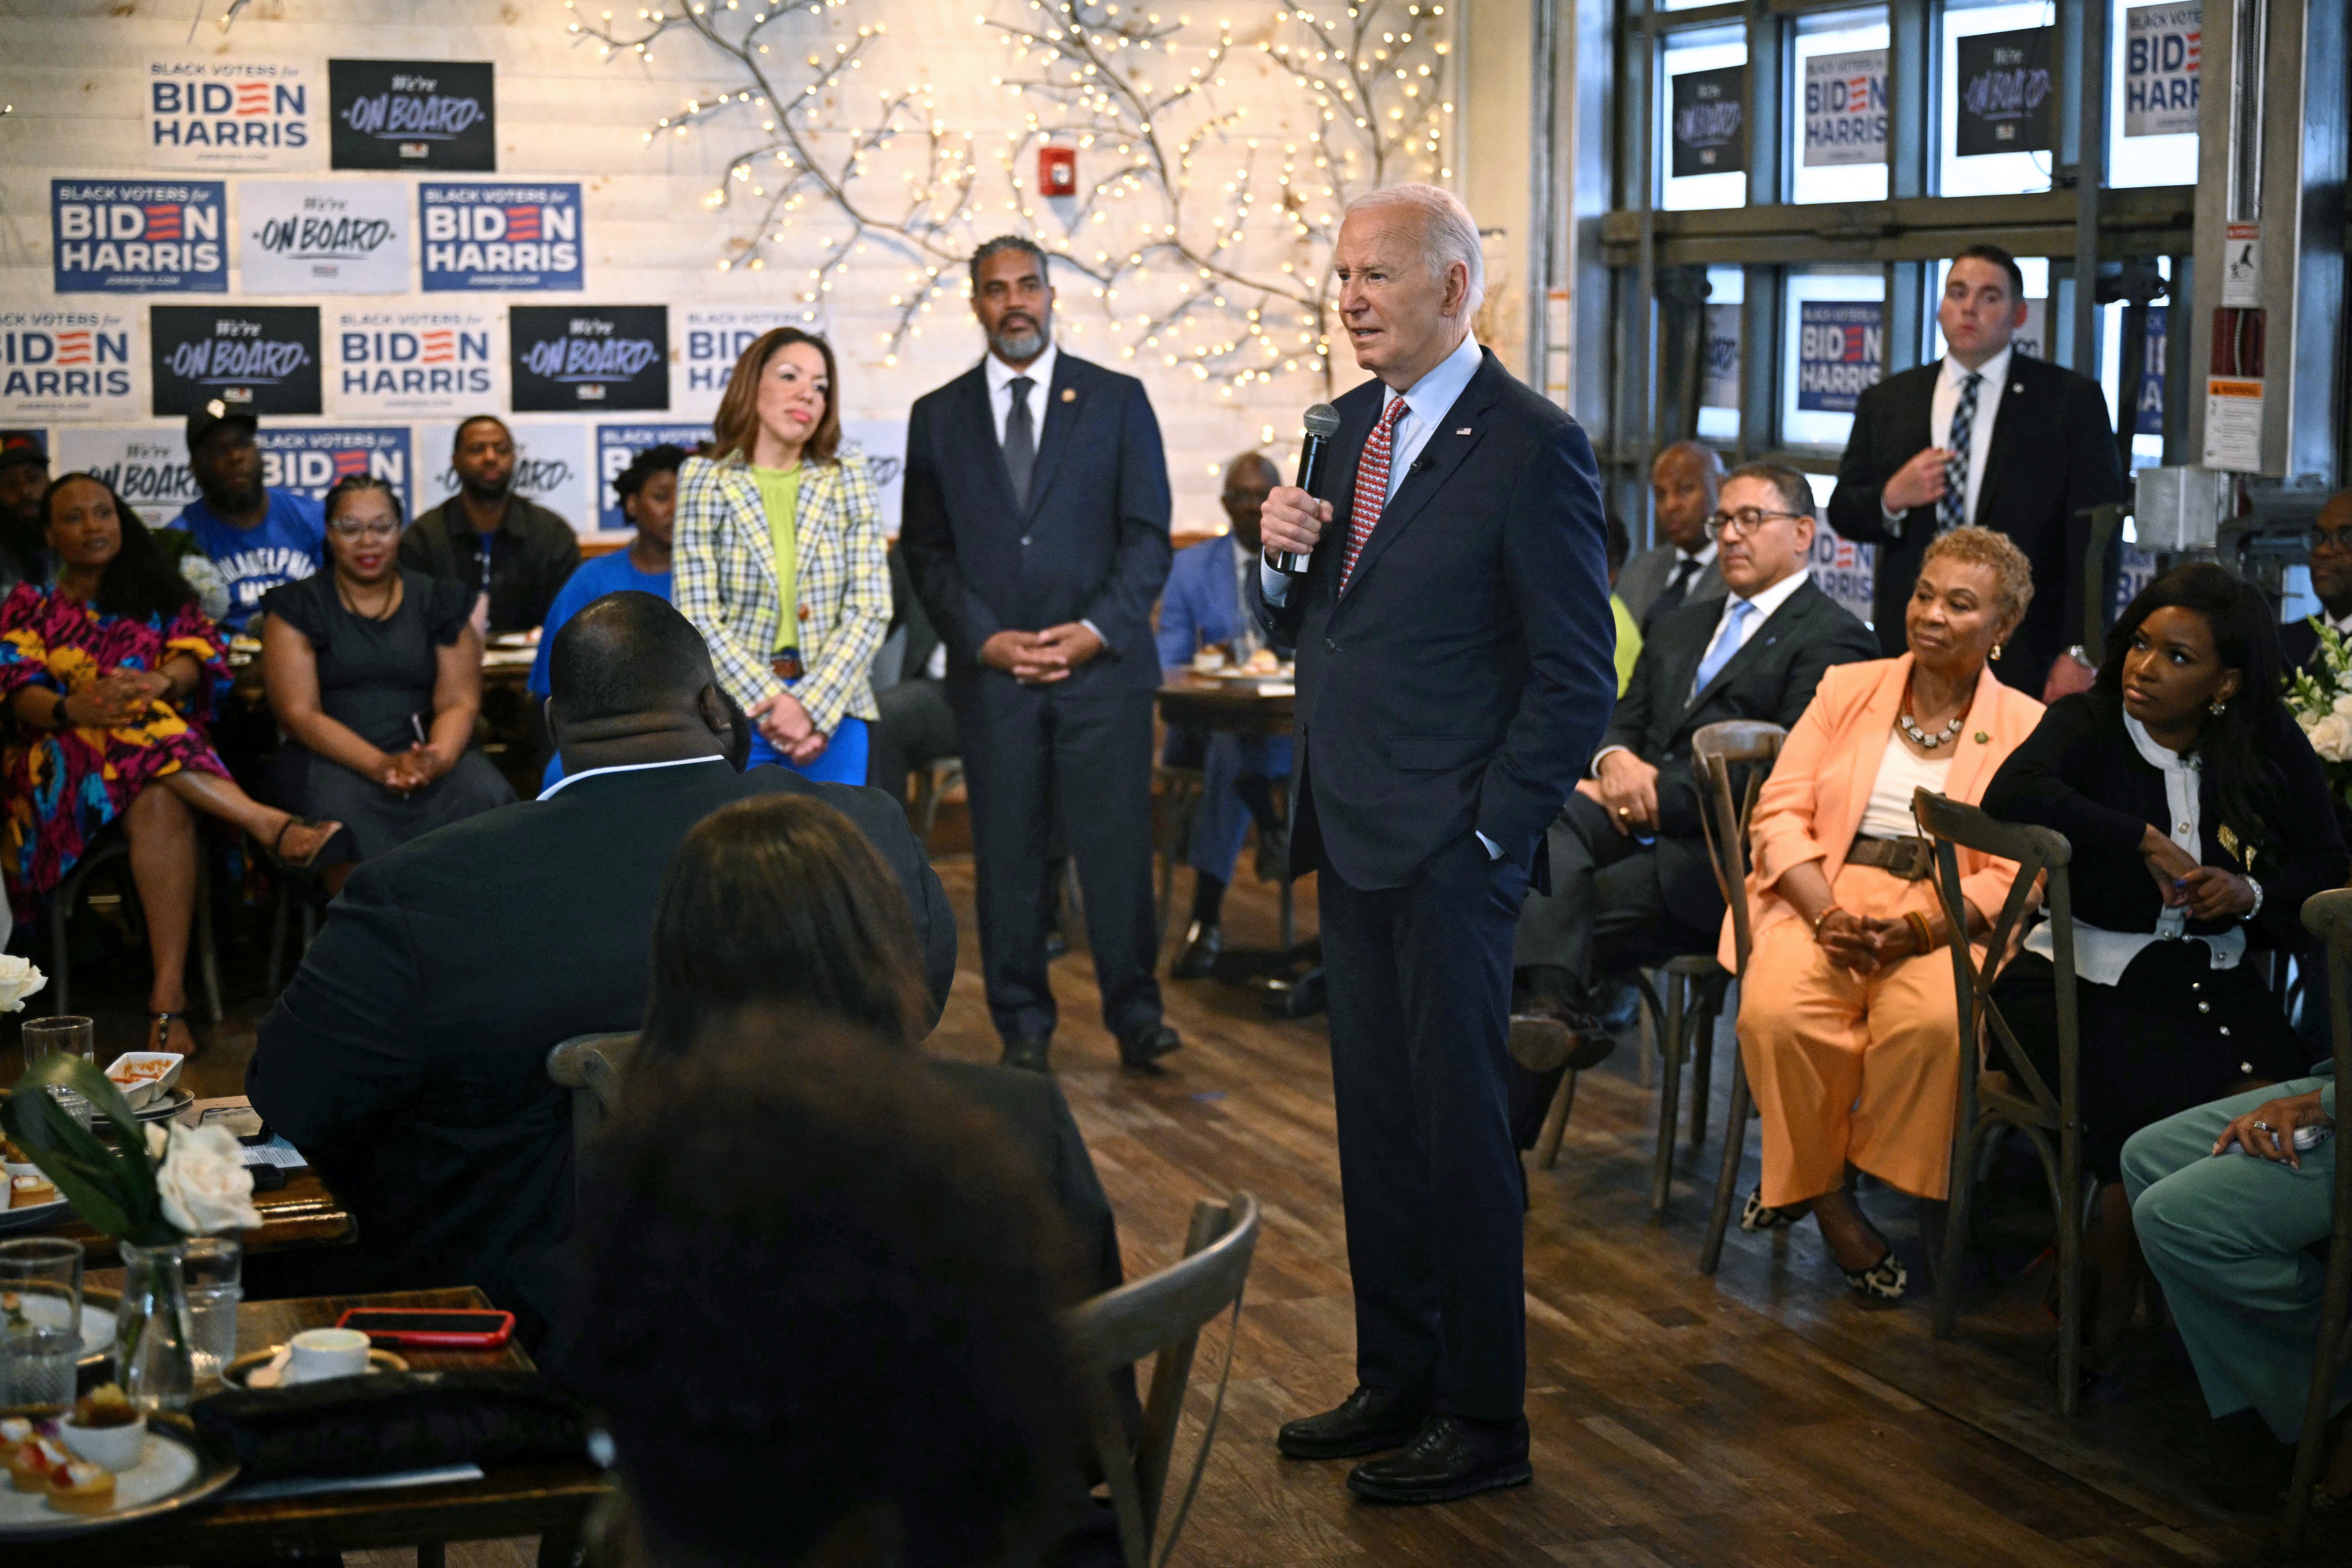 US President Joe Biden speaks at a campaign event at the South Side restaurant in Philadelphia, Pennsylvania, on May 29, 2024. (Photo by Mandel NGAN / AFP) (Photo by MANDEL NGAN/AFP via Getty Images)